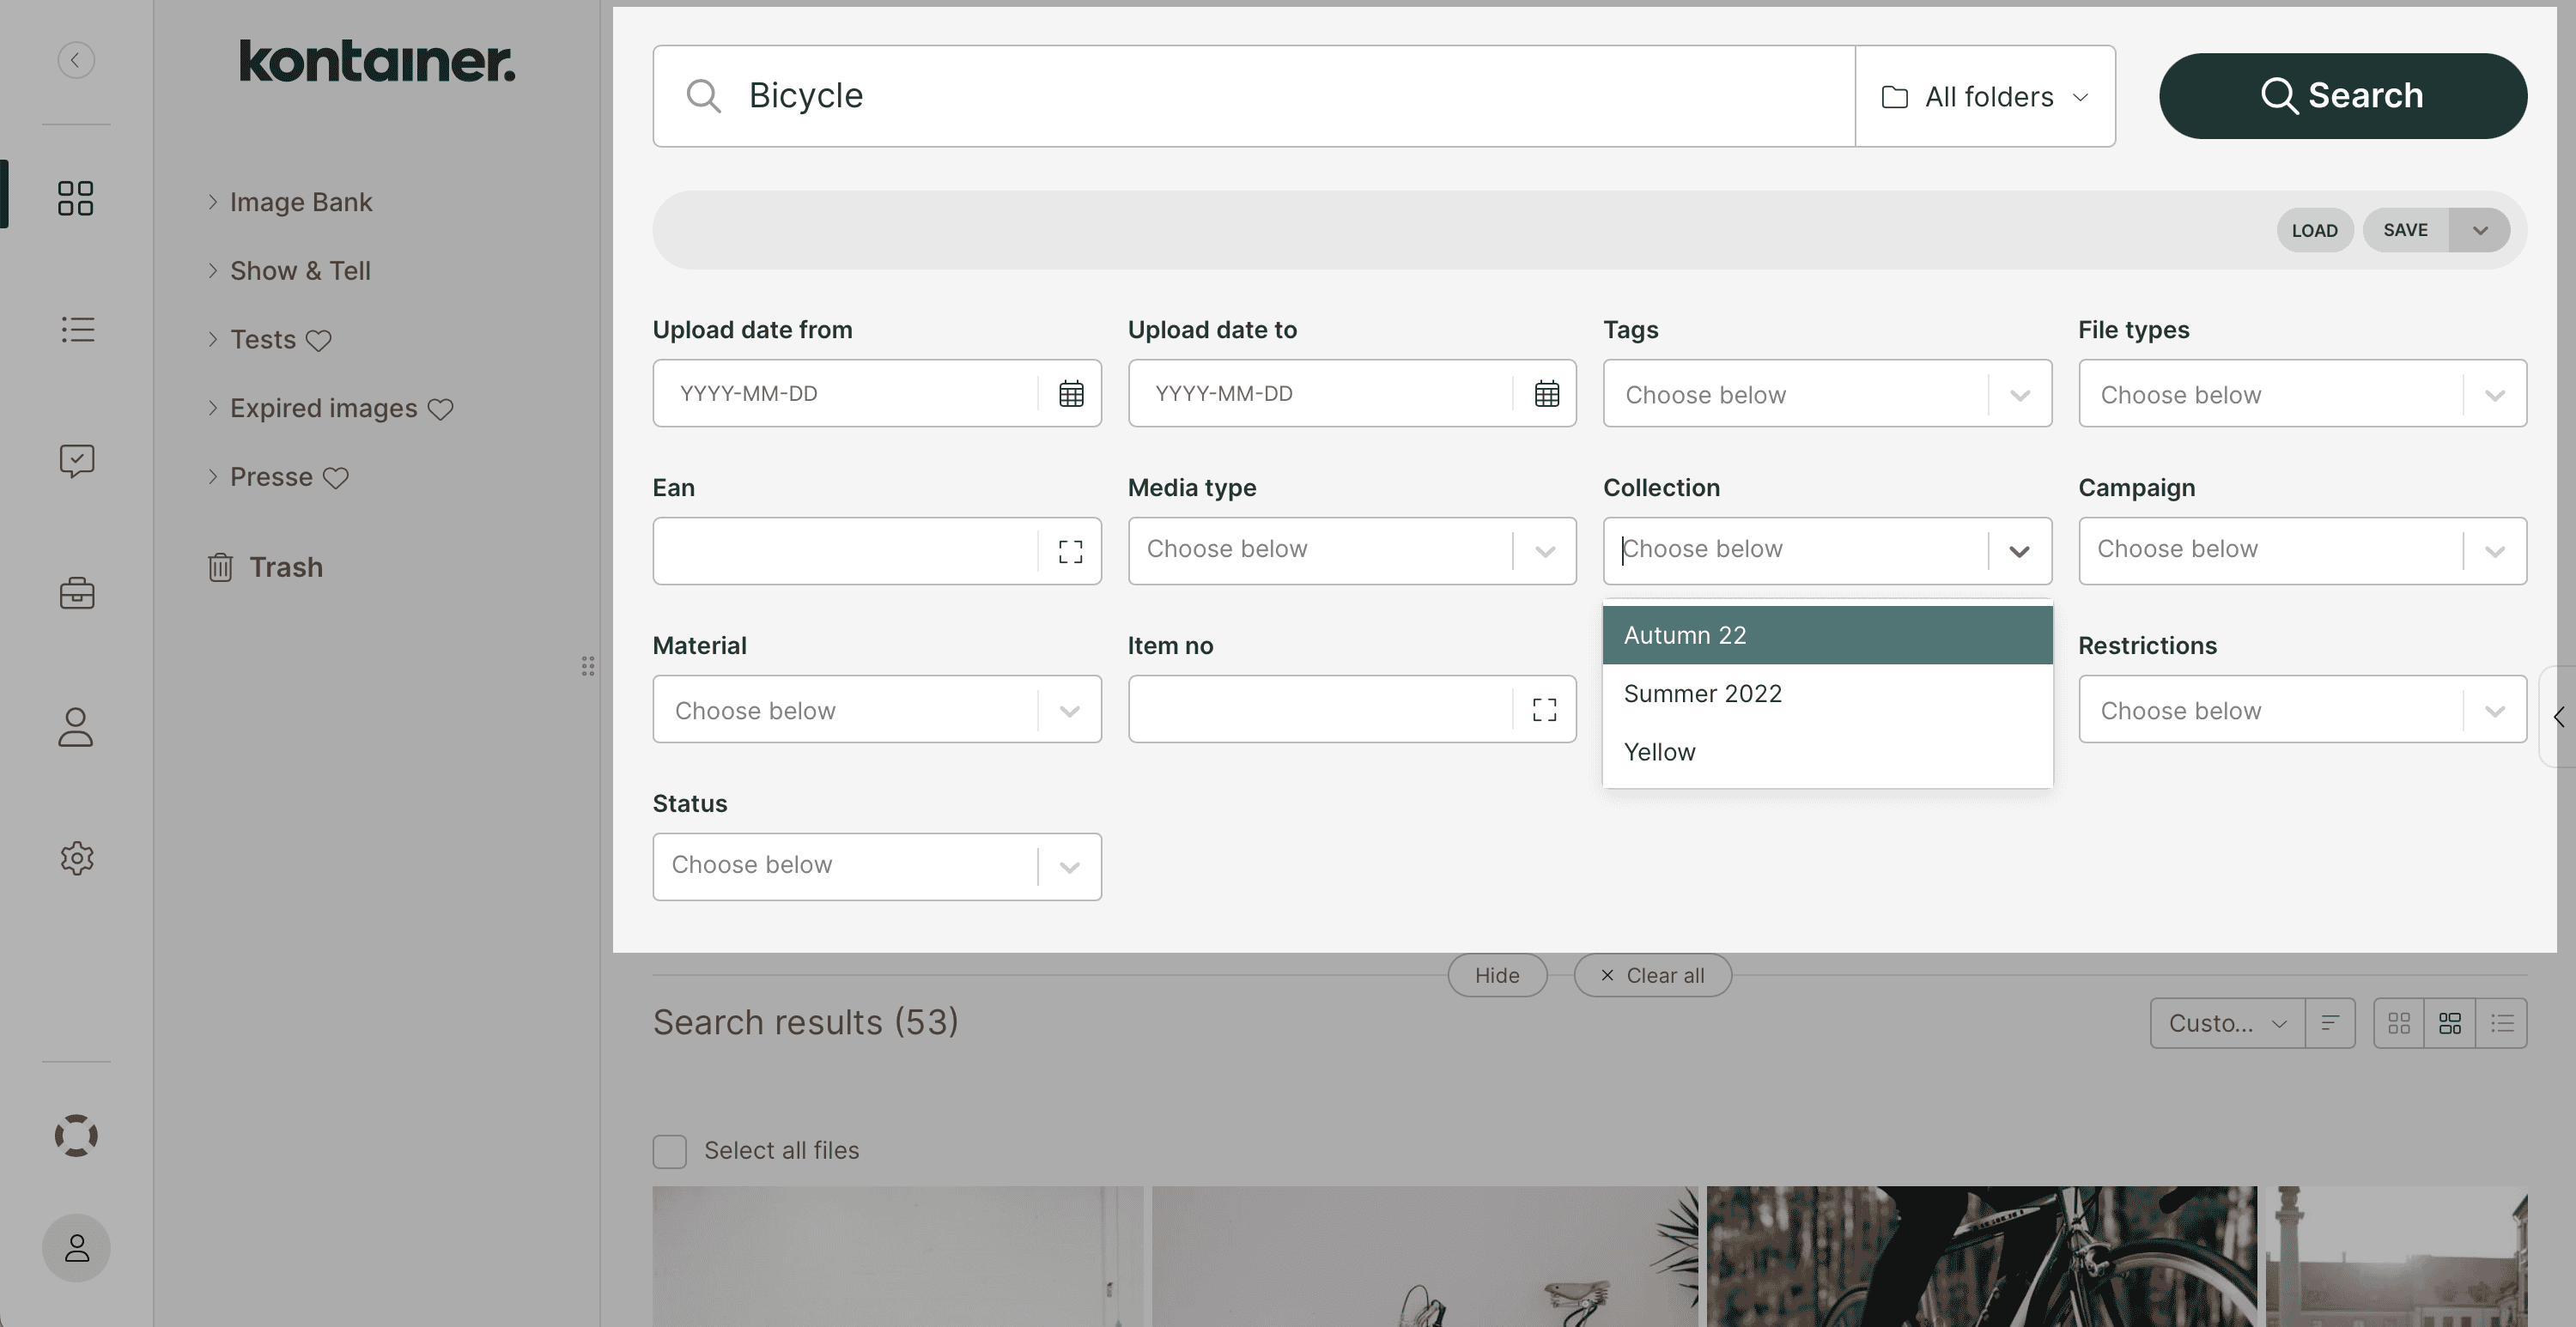 Filter search in Kontainer